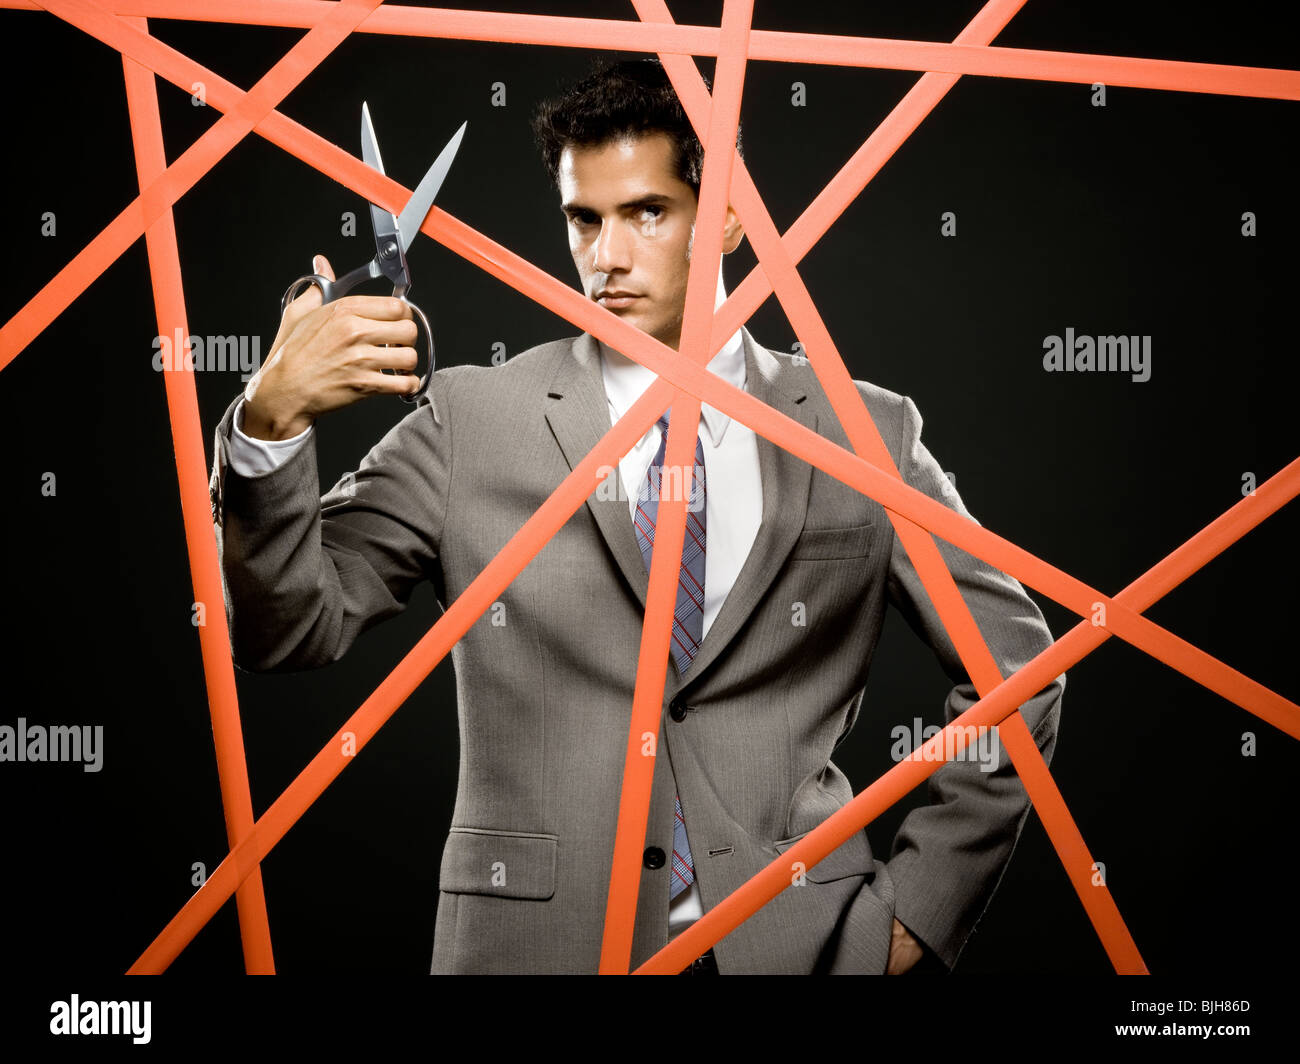 businessman cutting through the red tape Stock Photo